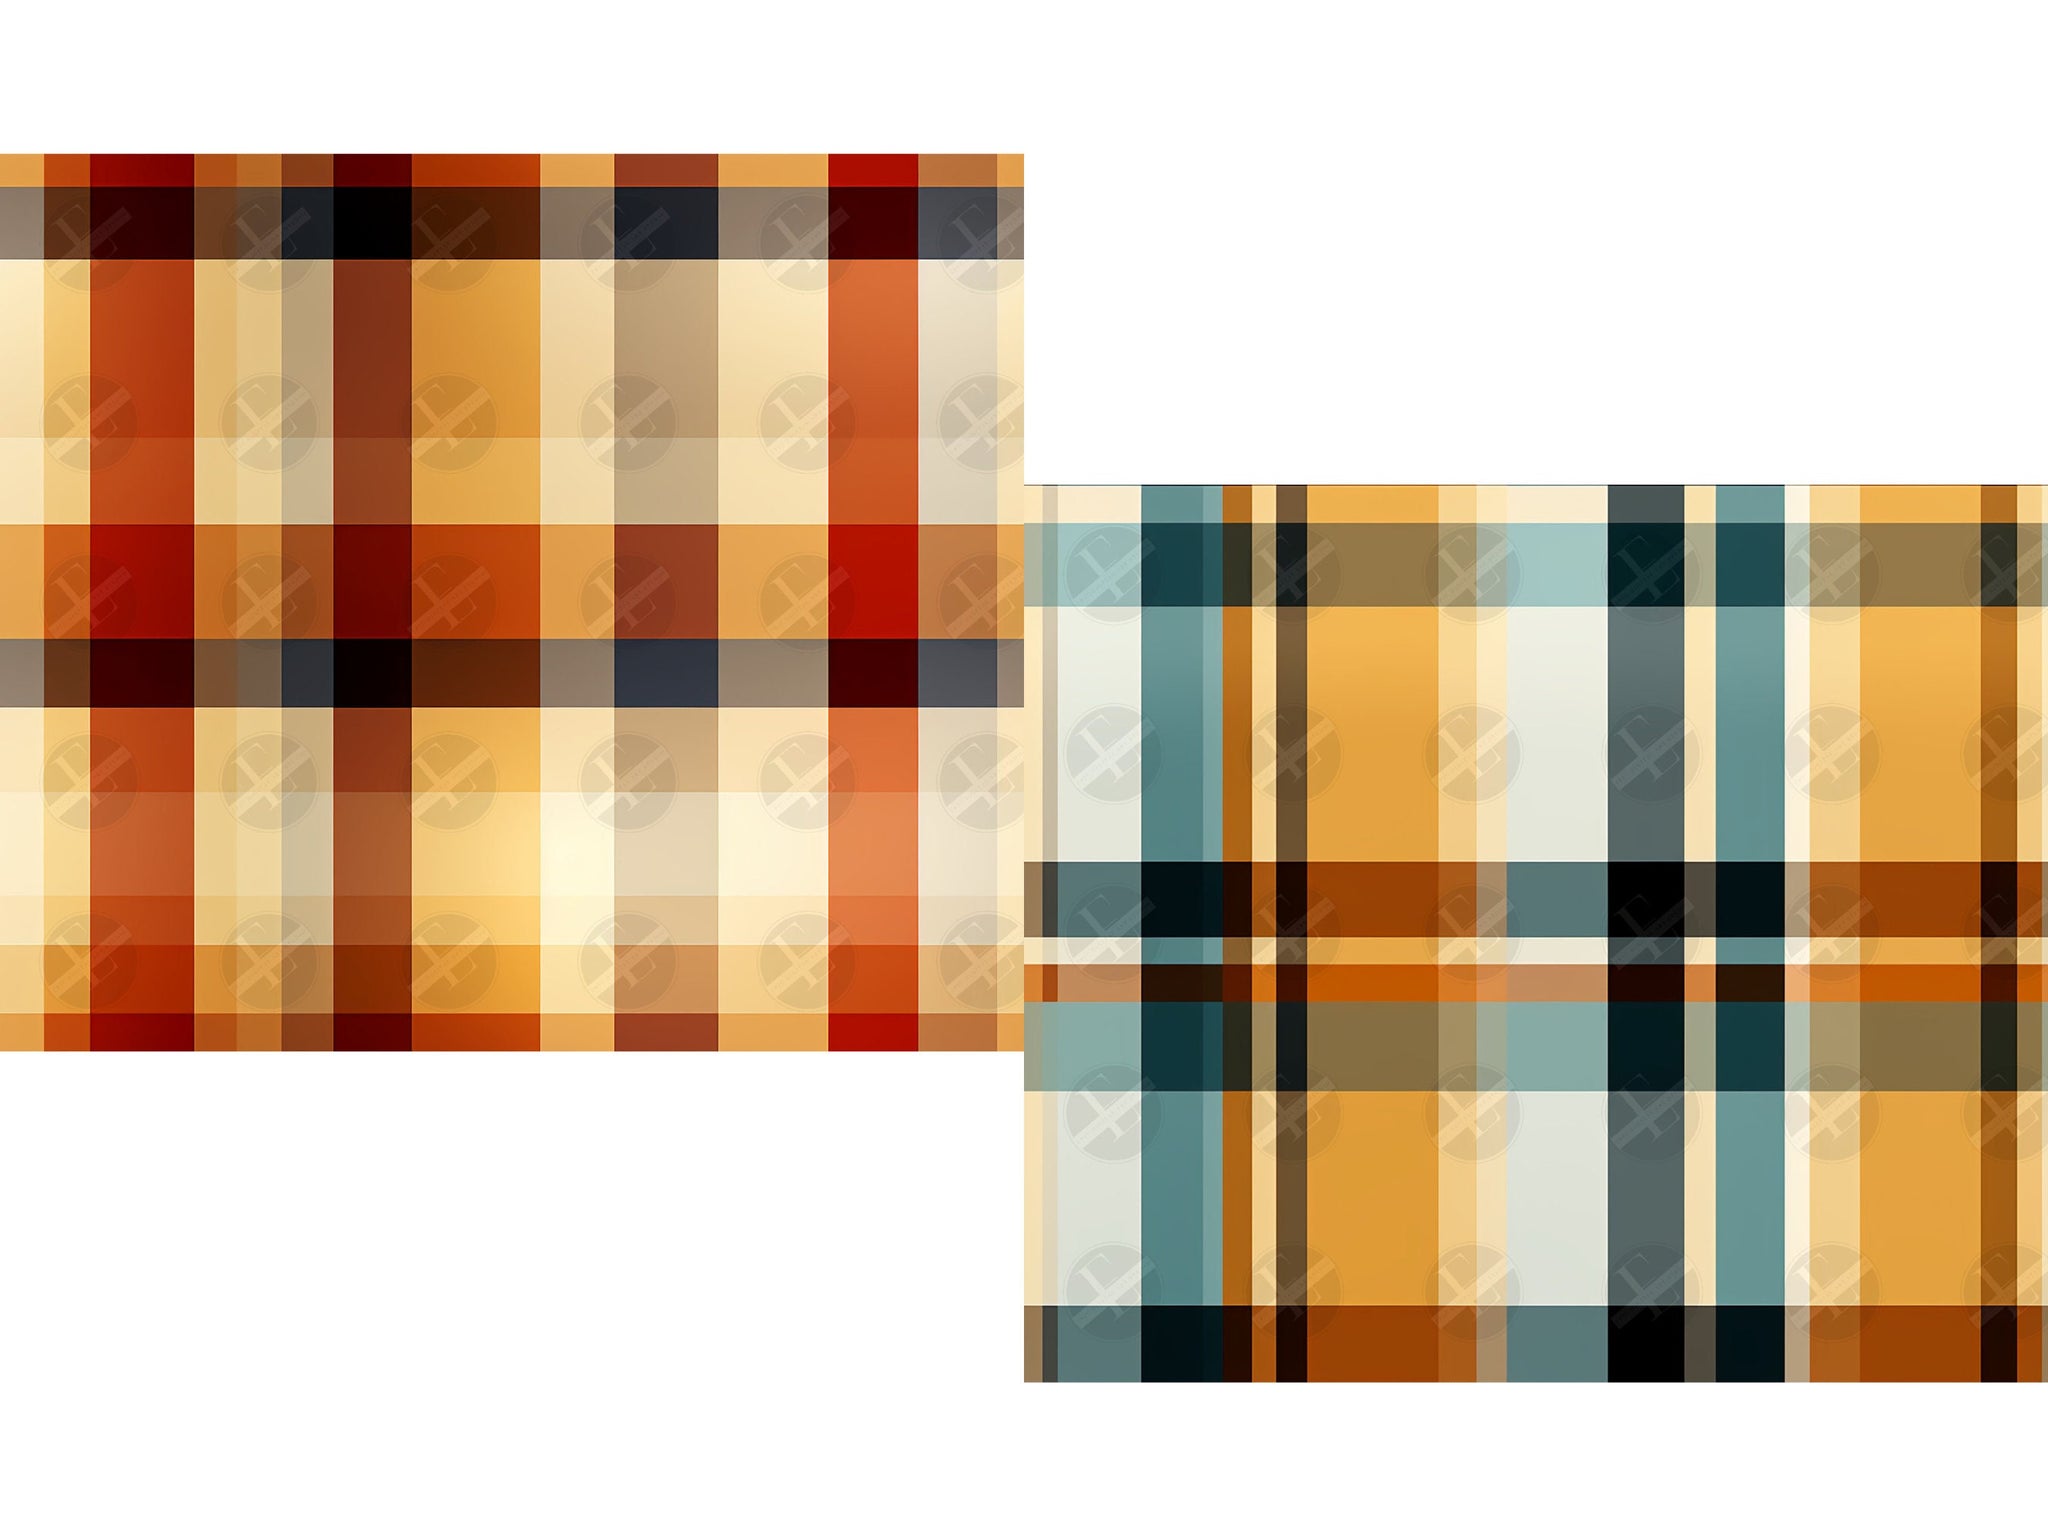 Autumn Plaid Seamless Patterns Digital Download PNG - Bundle of 10 - Rich Autumn Color Patterns - Commercial & Personal Use